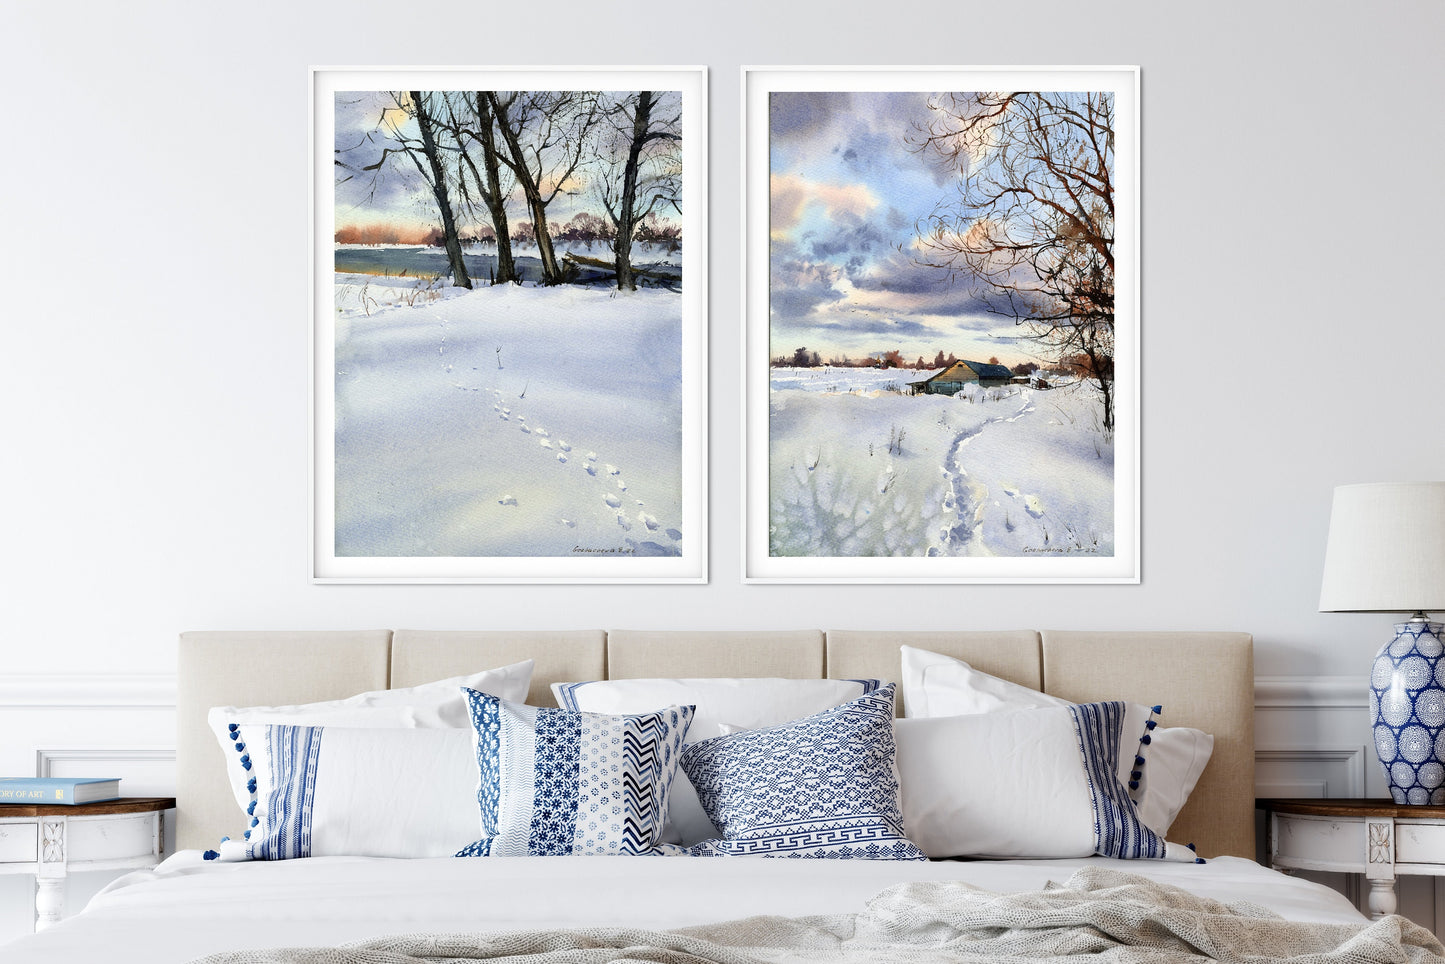 Winter Prints Set of 2 Piece, Nature Wall Decor, Snow Landscape Watercolor Painting, Scenery Large Prints, Country Art